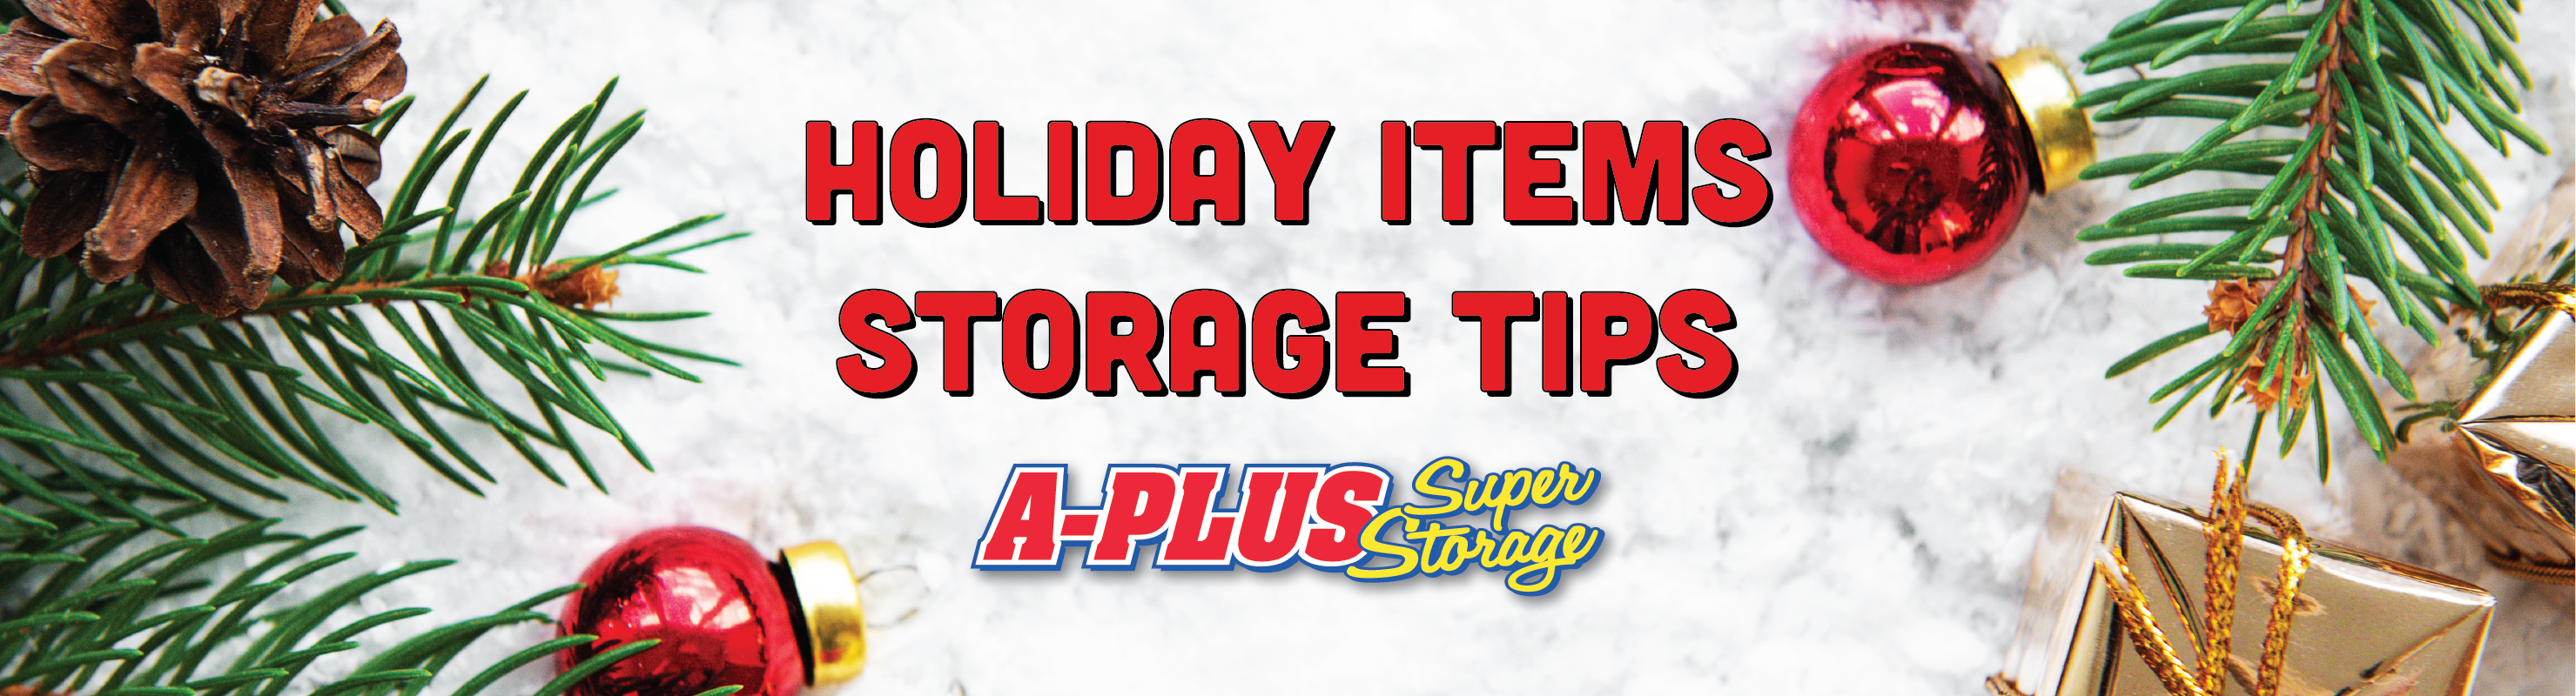 Holiday storage tips brought to you by A Plus Super Storage